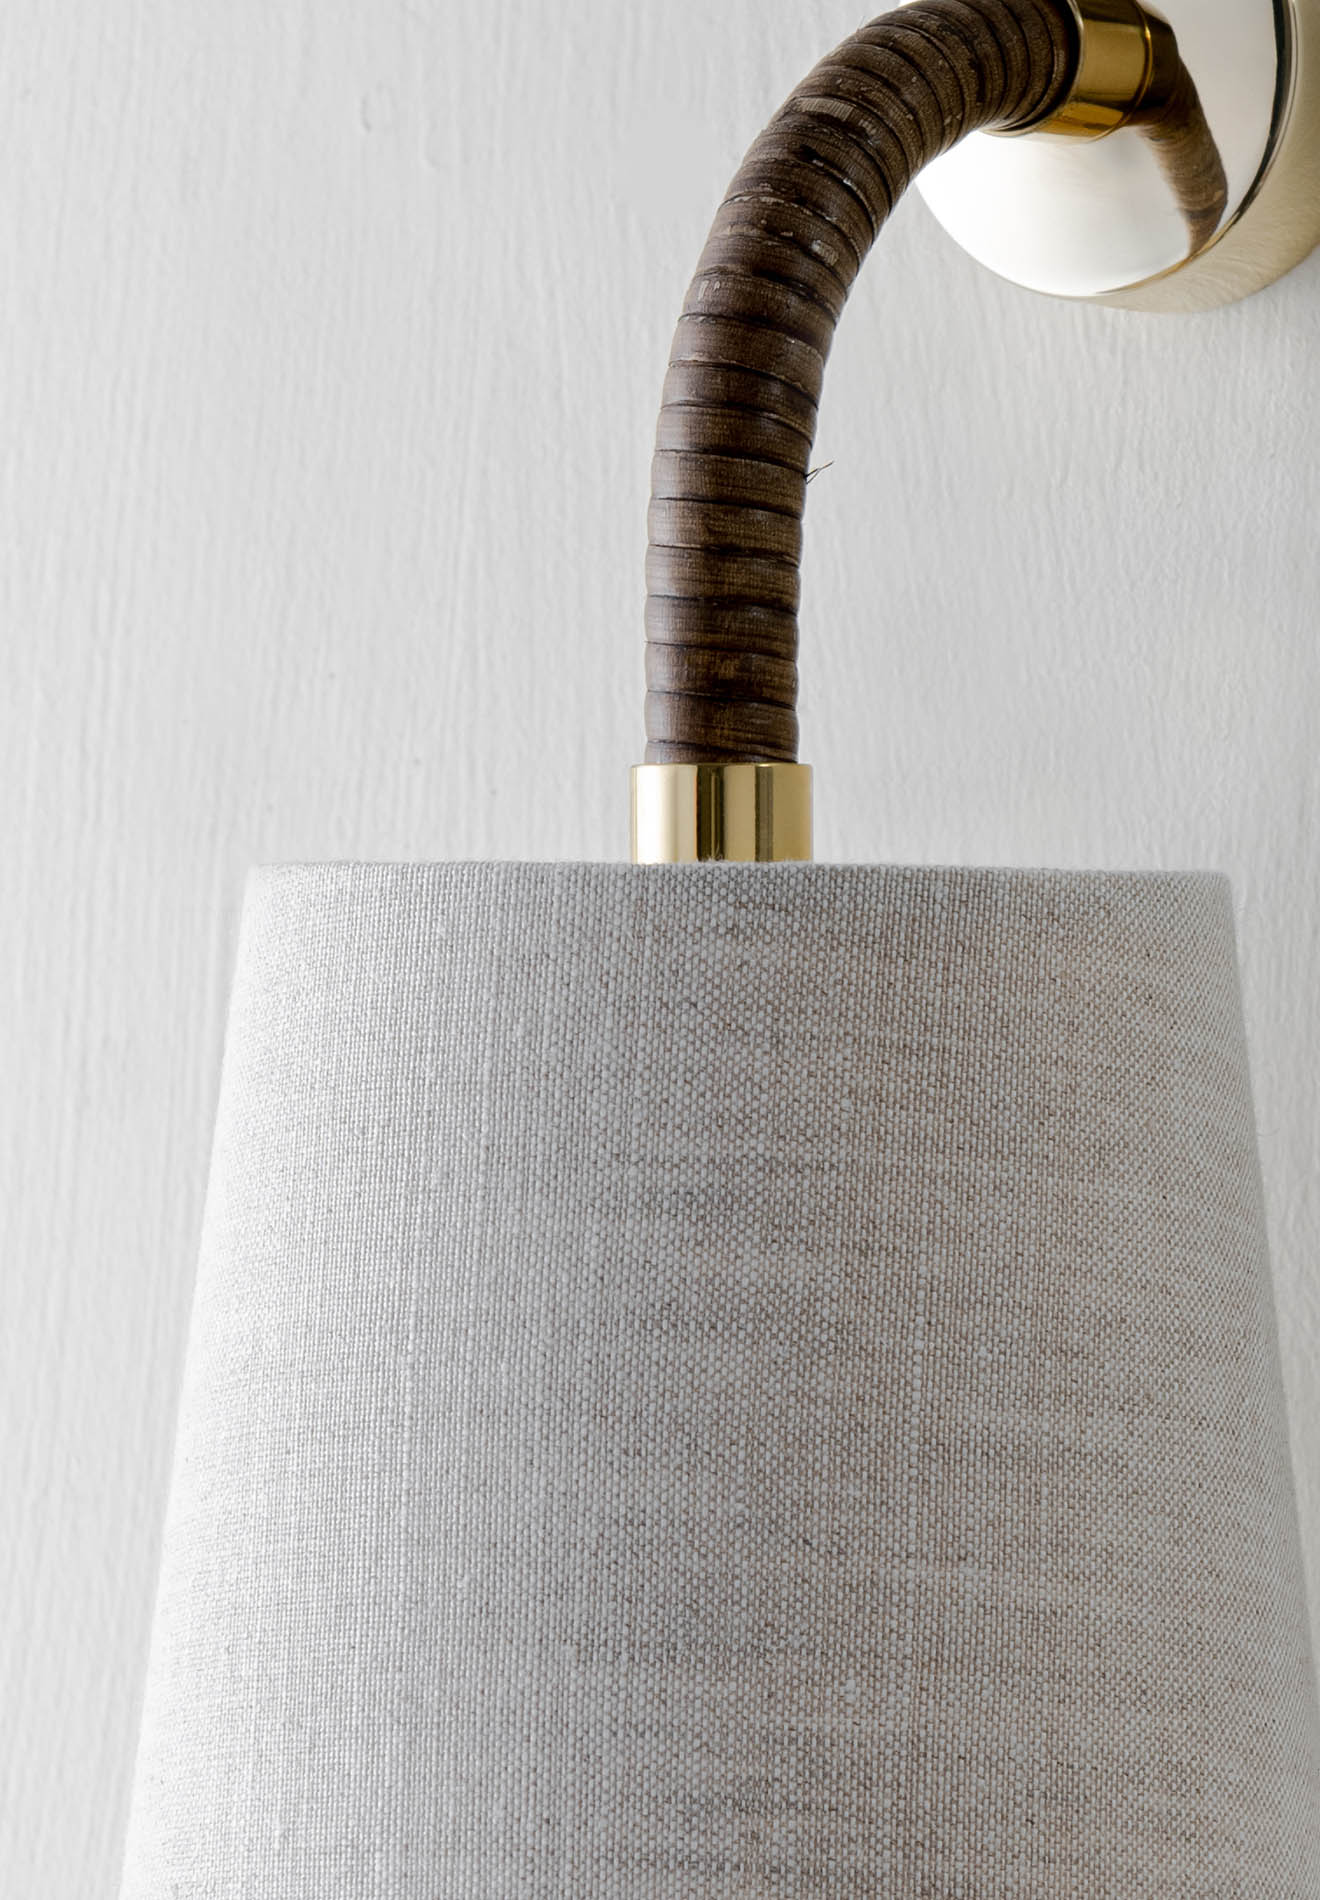 Dark Cane with Brass shown with 5.5" Downlight Fez Natural Linen and Cream Card lining